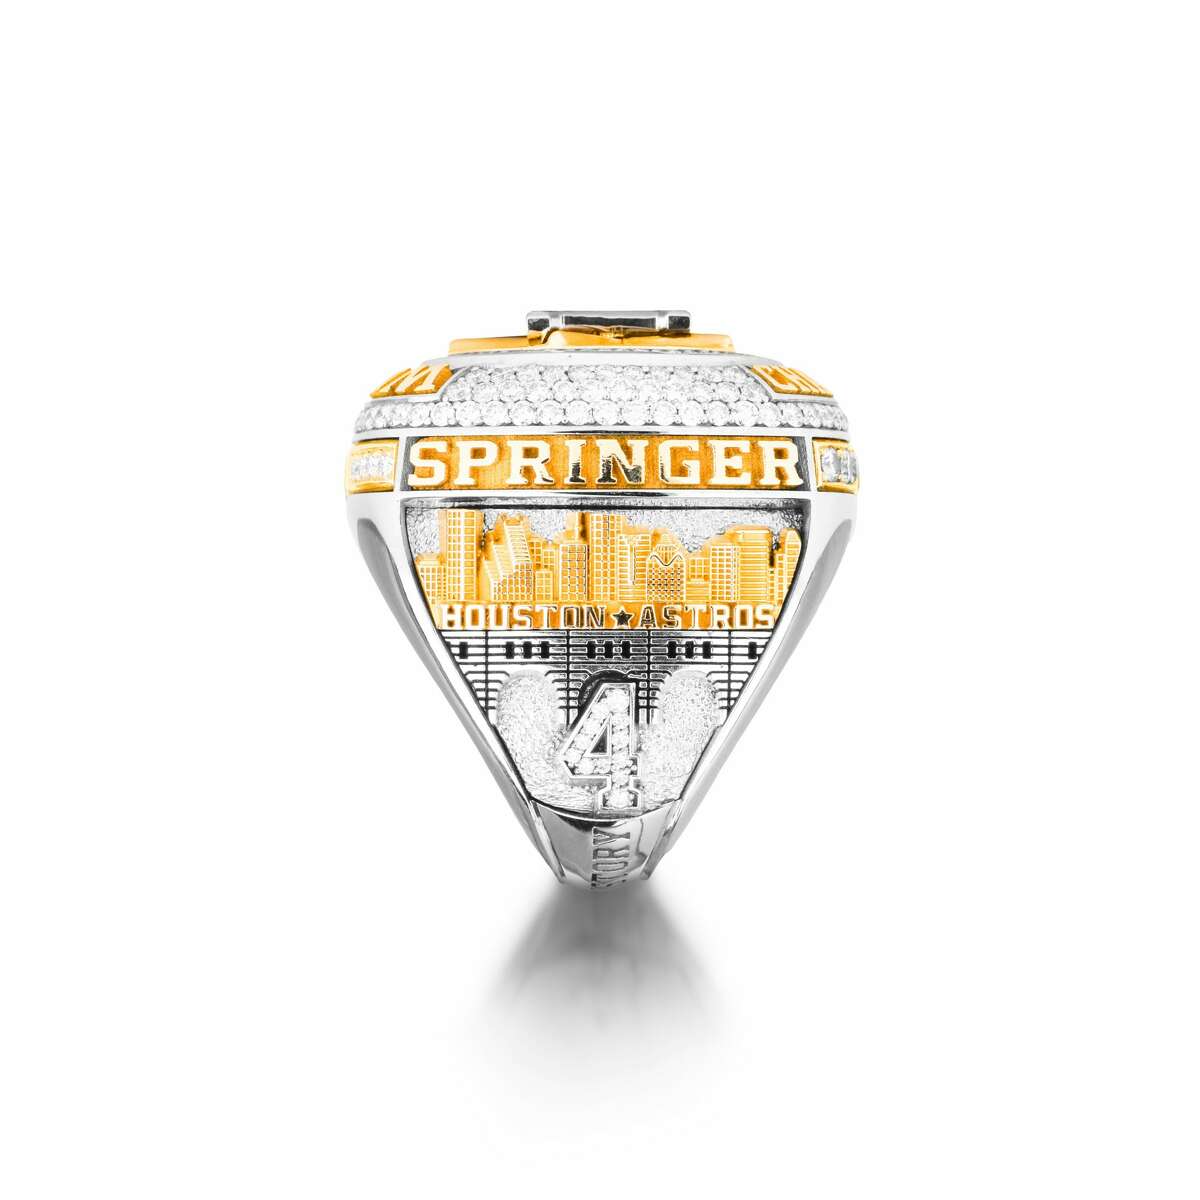 Astros World Series rings have 214 diamonds, 25 sapphires